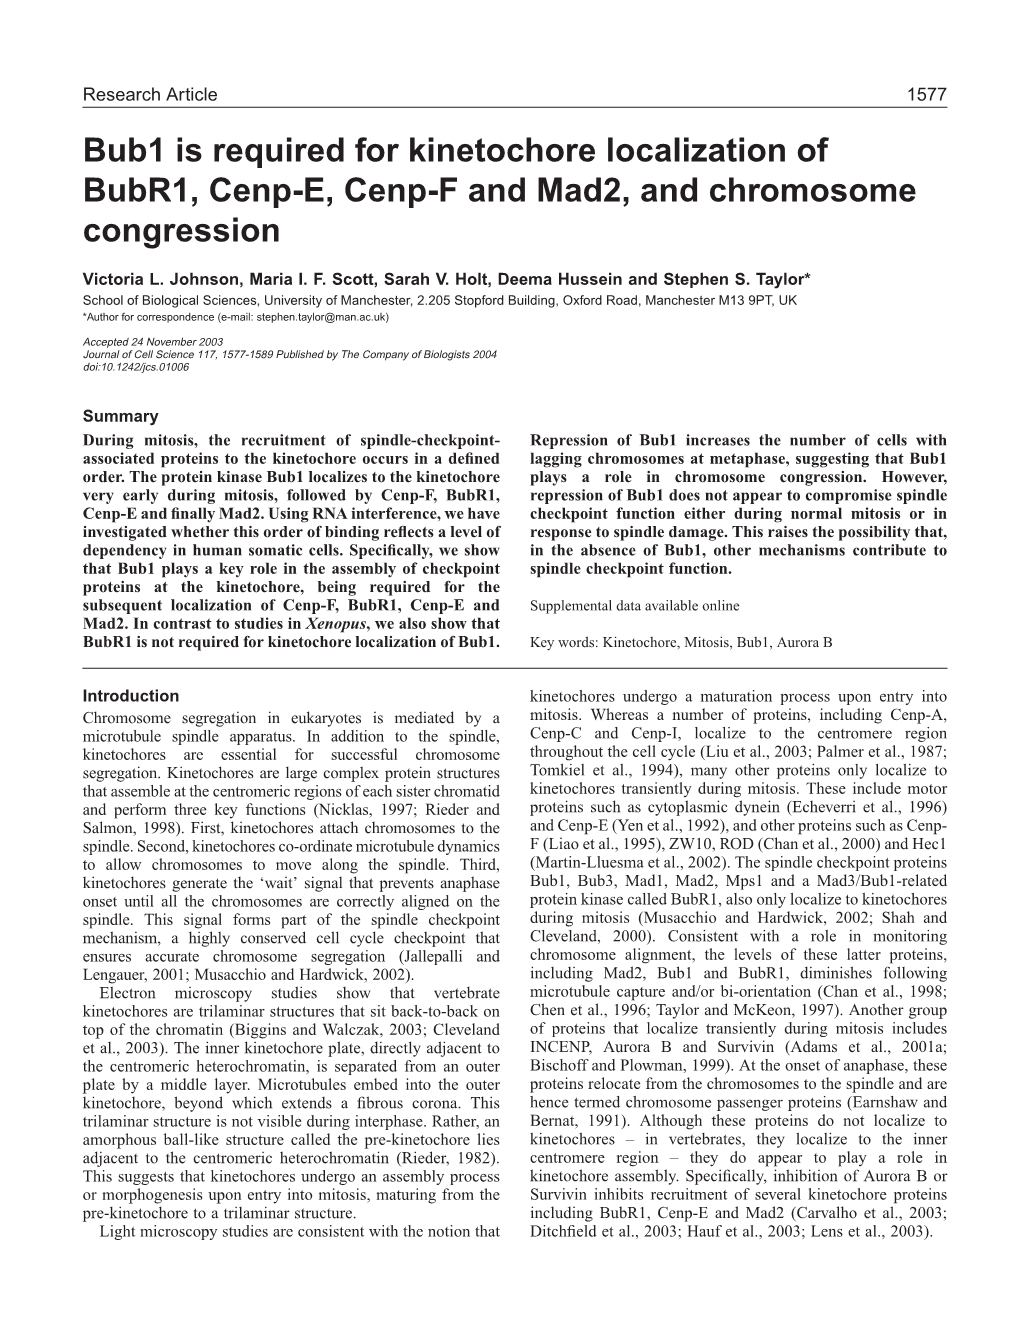 Bub1 Is Required for Kinetochore Localization of Bubr1, Cenp-E, Cenp-F and Mad2, and Chromosome Congression